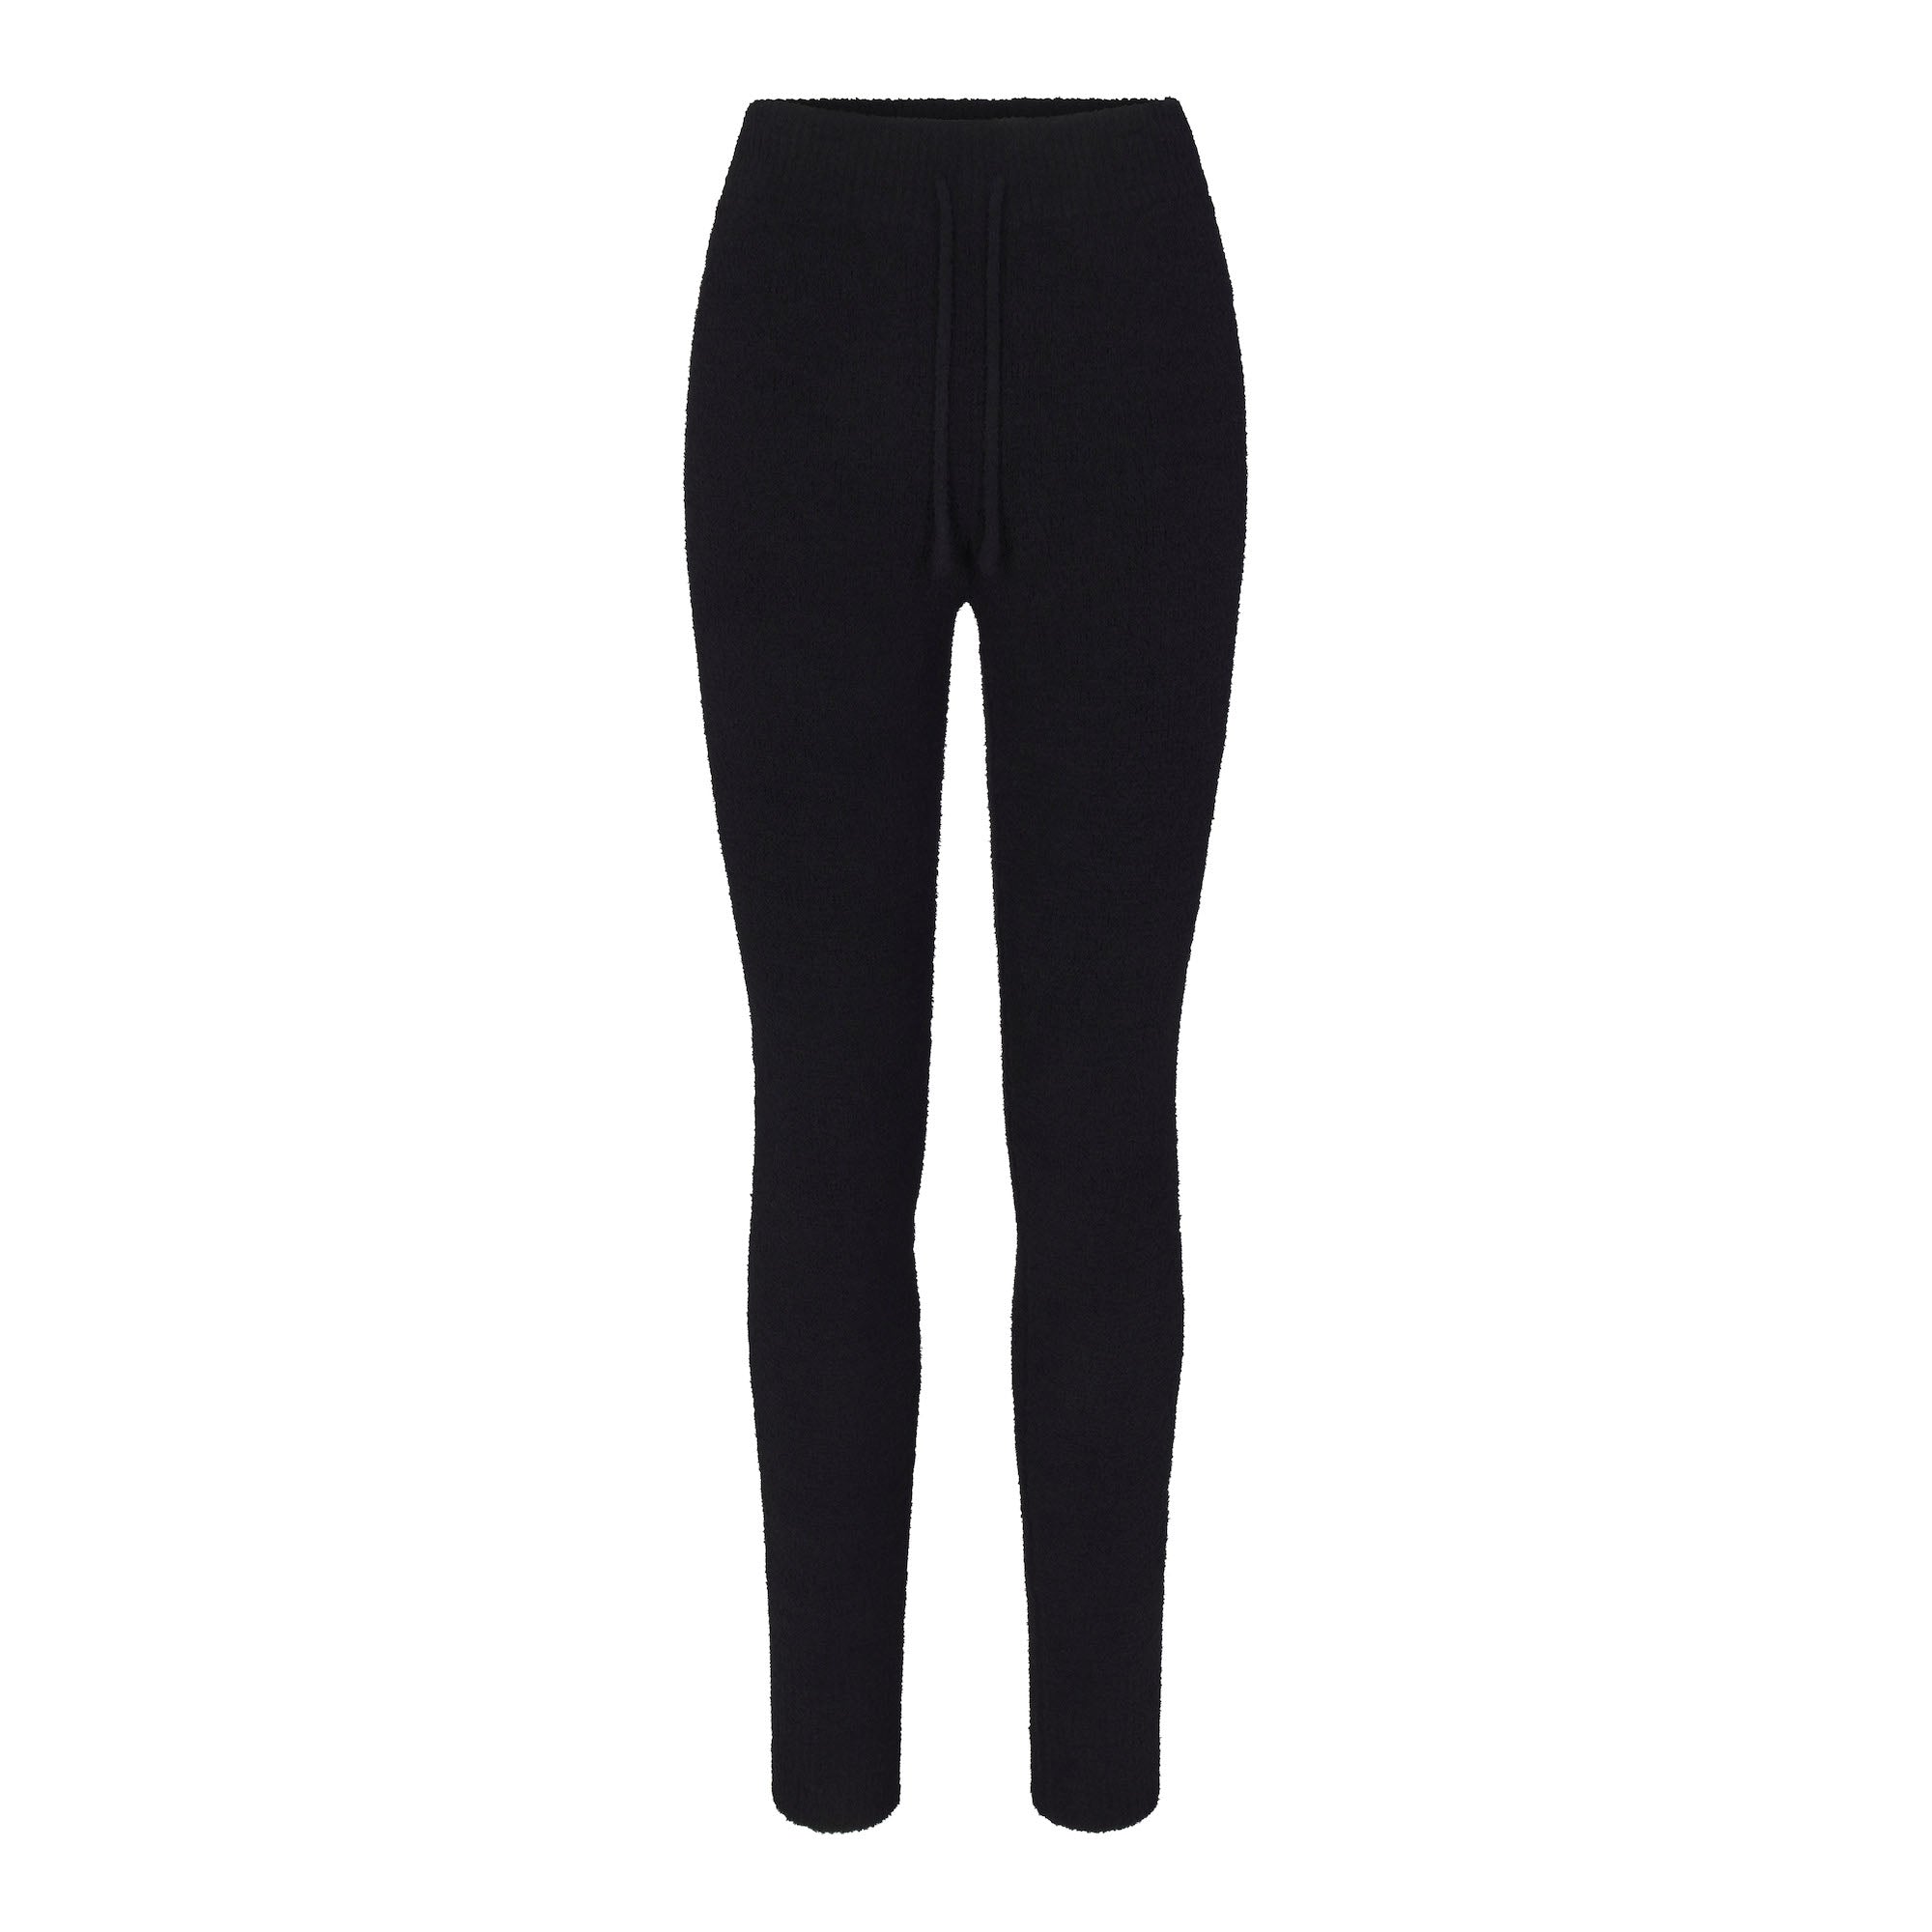 SKIMS Waffle Knit Thermal Cotton blend High Waisted Jogged Leggings Black  medium - $26 - From Nolan